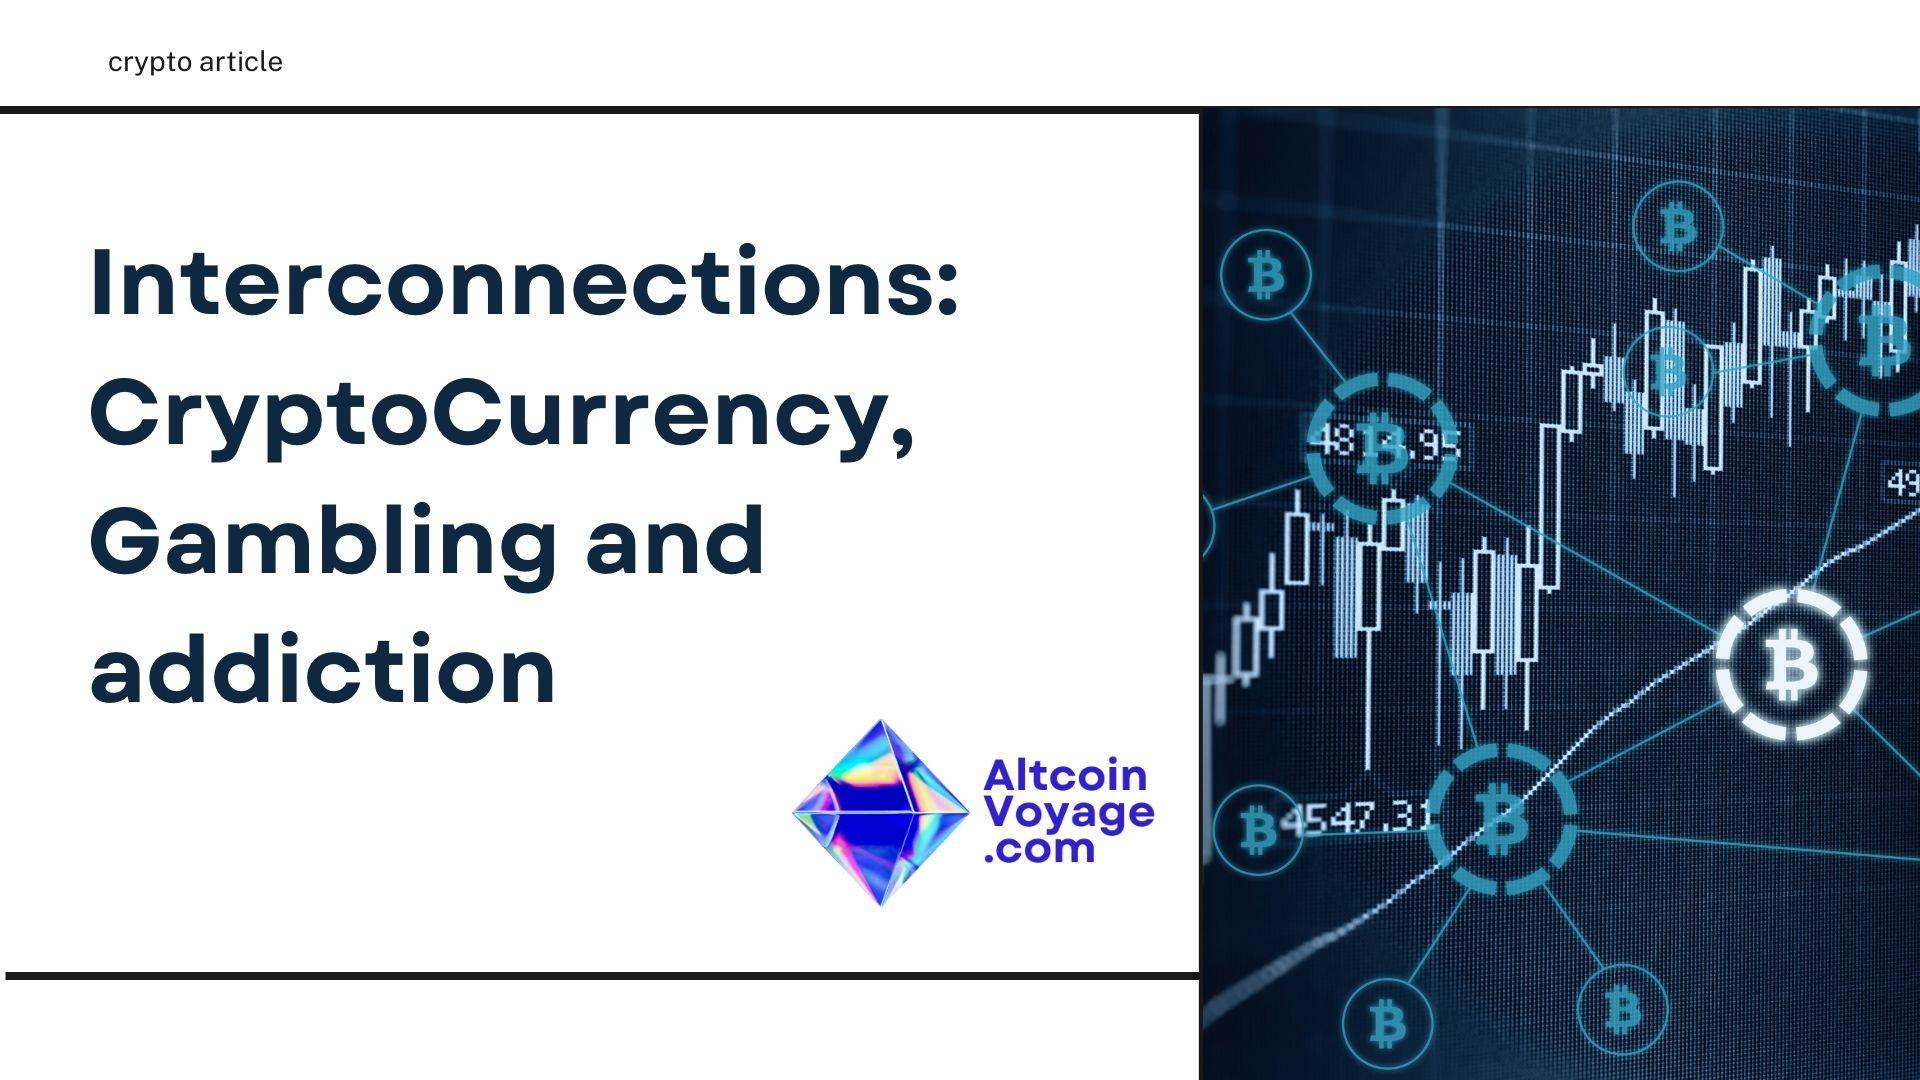 Interconnections: Cryptocurrency, Gambling, and Addiction